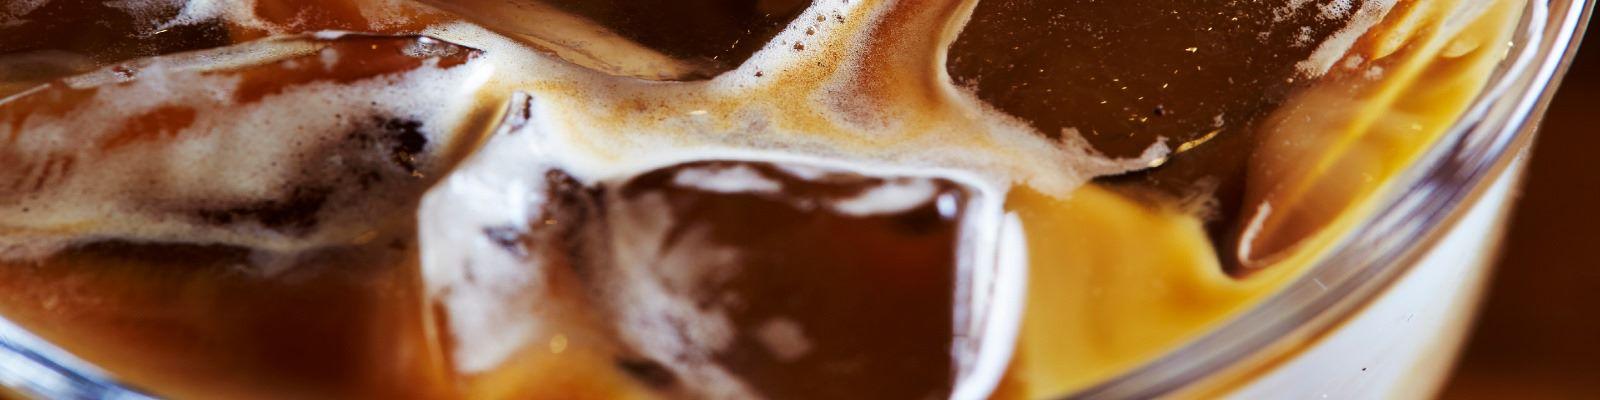 Hot vs. Iced Coffee: Is One Better For You Than The Other